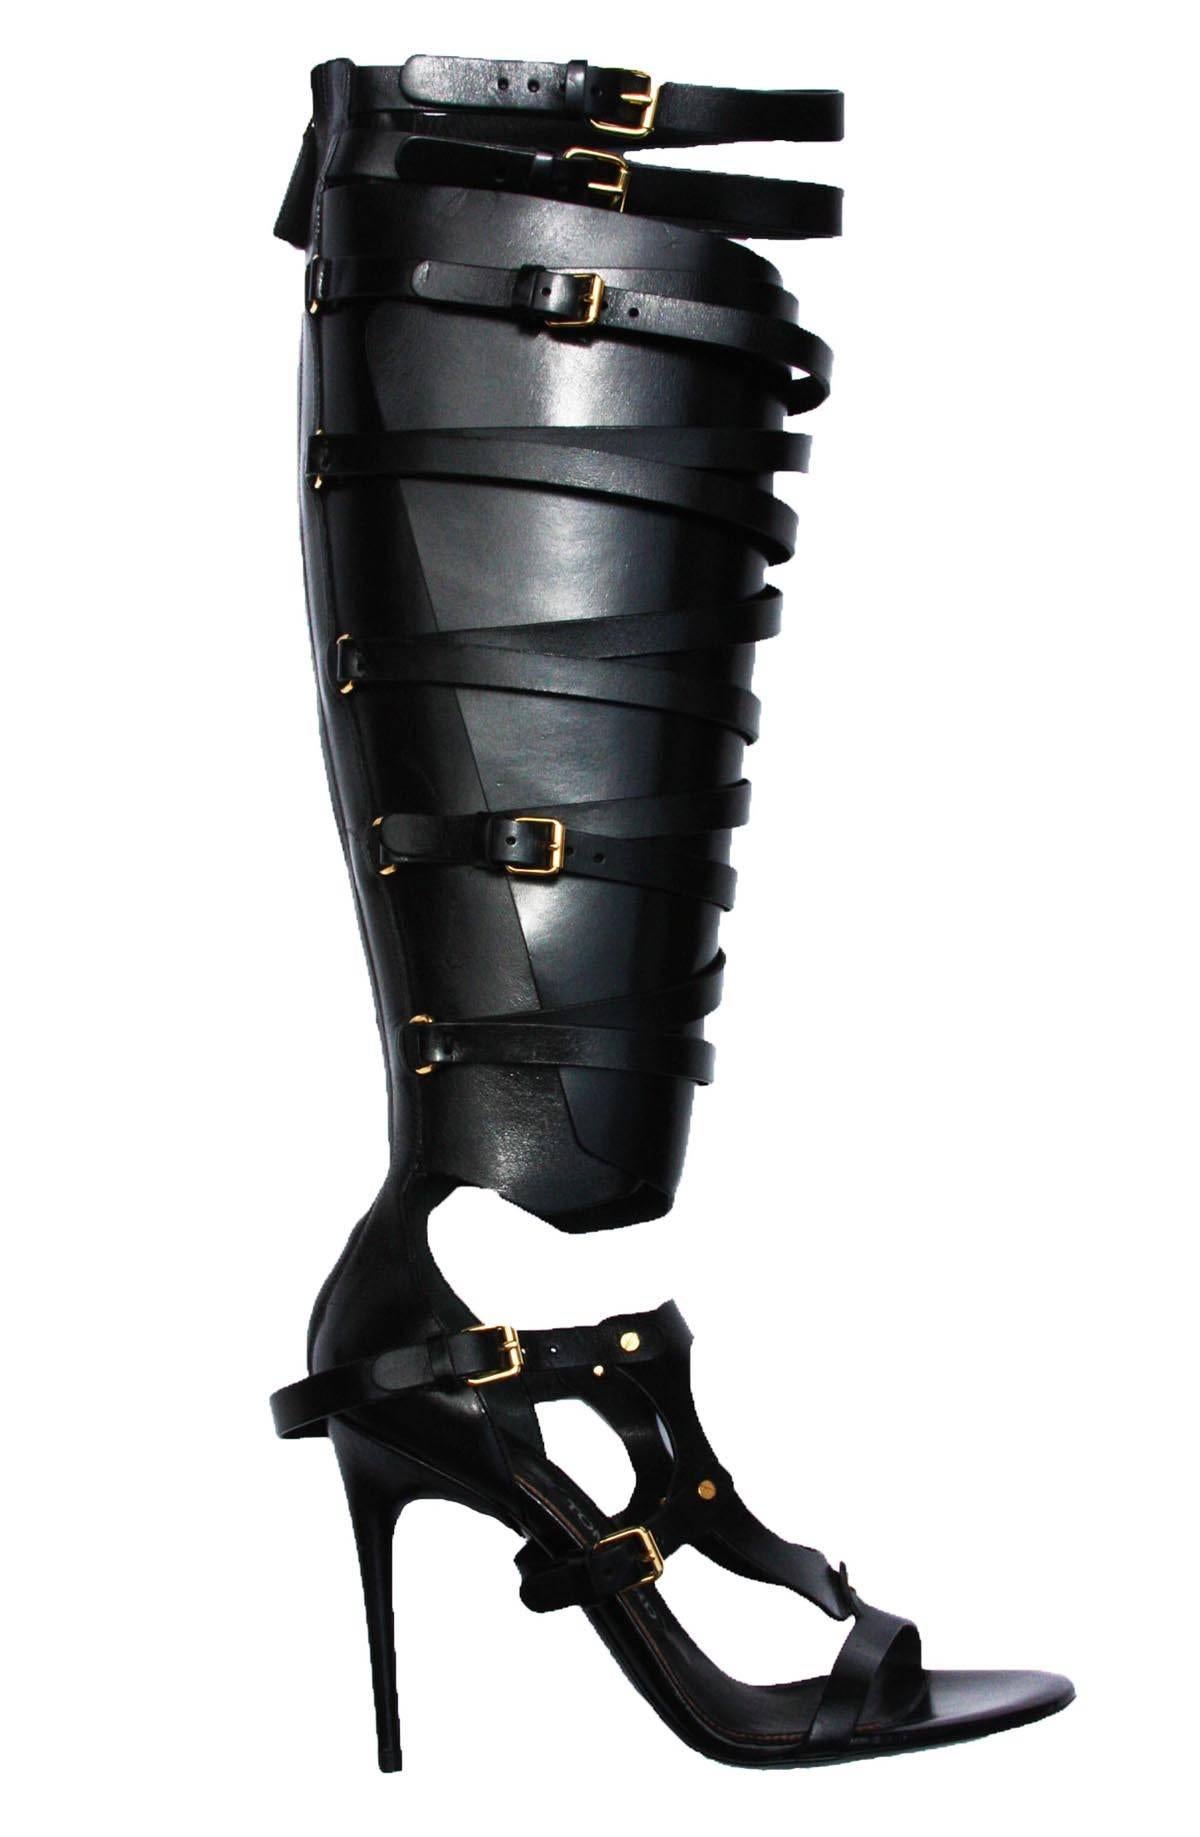 New Tom Ford Black Strappy Buckled Gladiator Sandal Boots
Italian size 39.5
100 % Leather.
Golden hardware.
Buckled straps wrap around the shaft.
Open toe. Back zip. 4 1/4